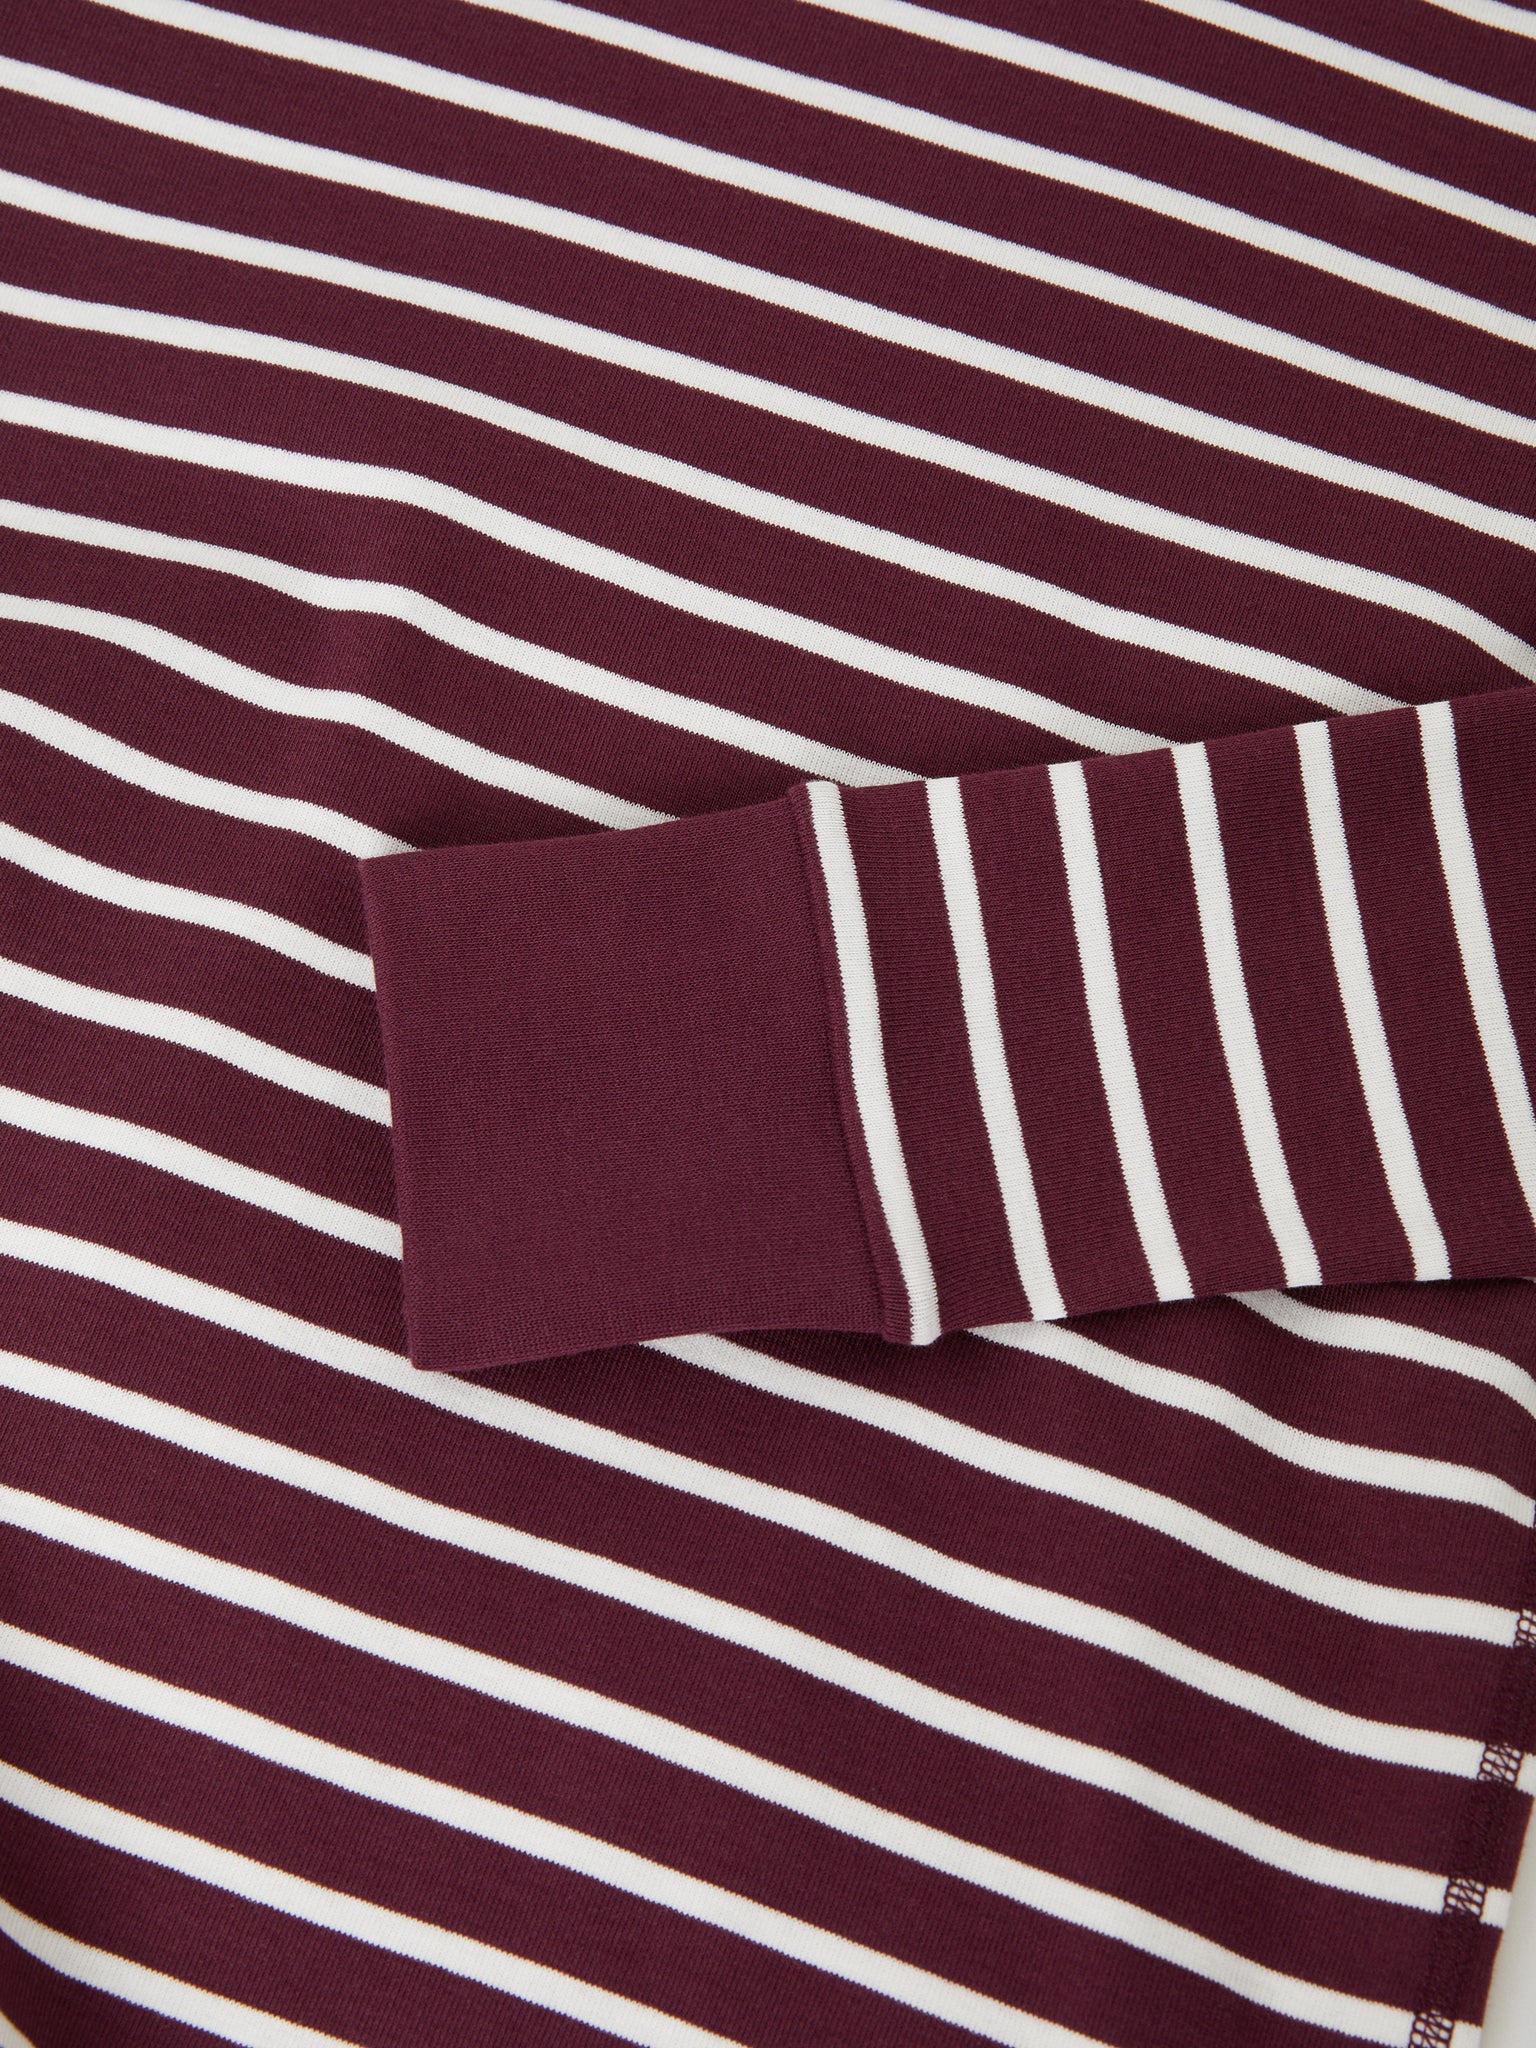 Organic Cotton Burgundy Adult Pyjamas from the Polarn O. Pyret adult collection. Clothes made using sustainably sourced materials.